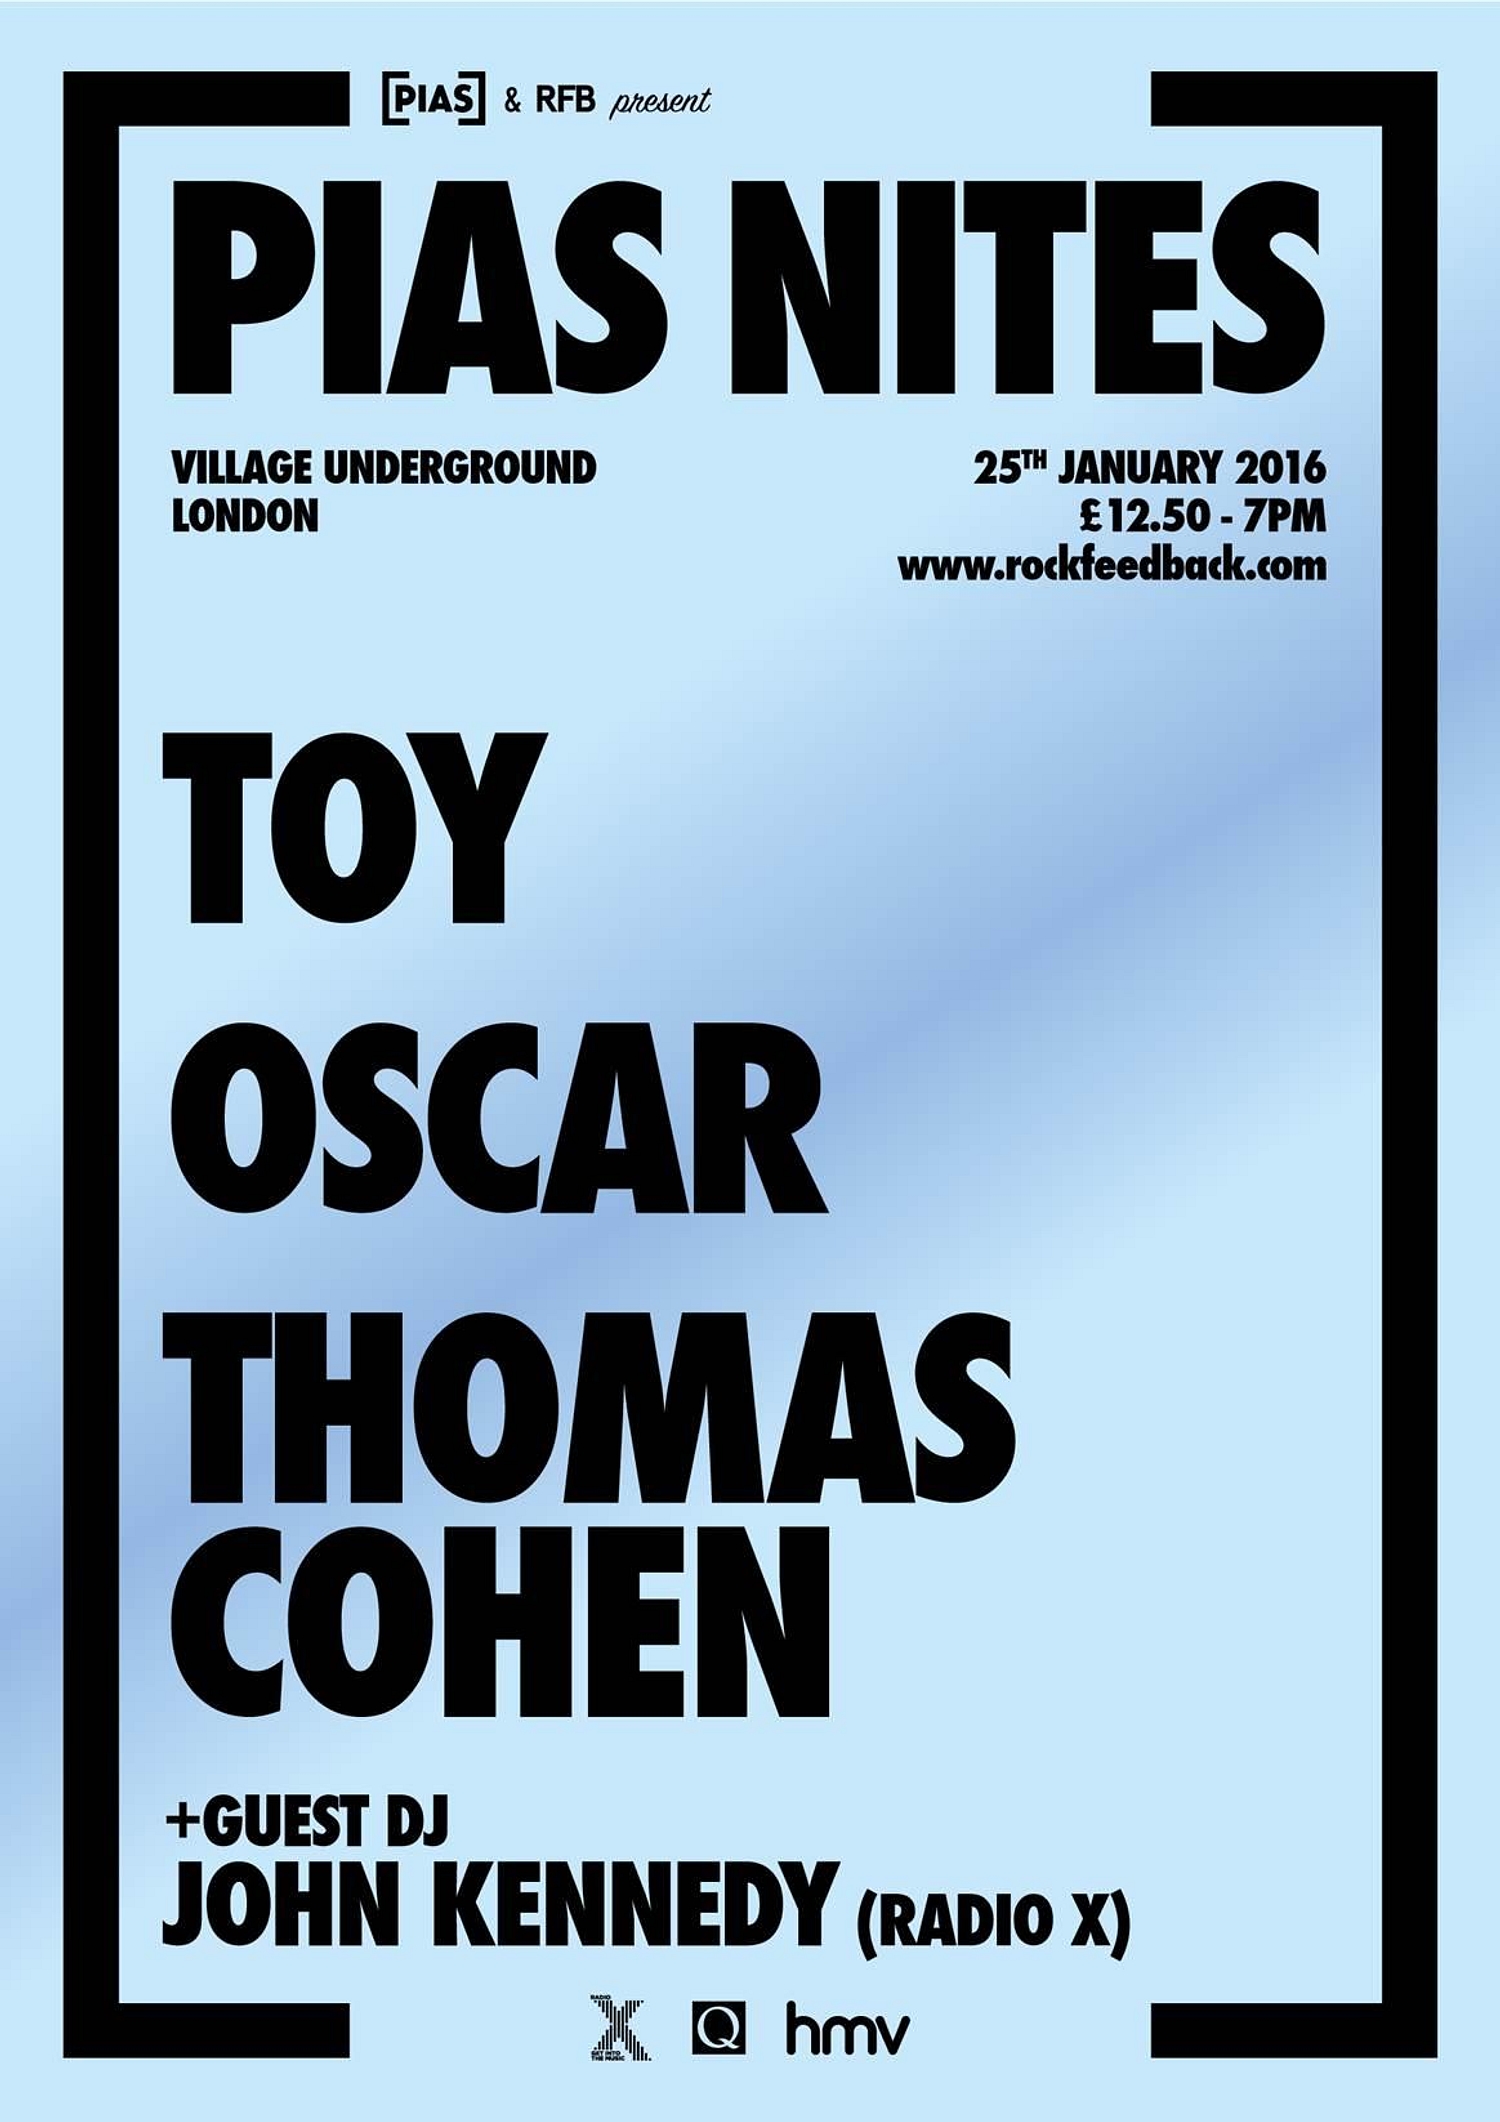 Bloc Party, TOY and Oscar to play [PIAS] Nites 2016